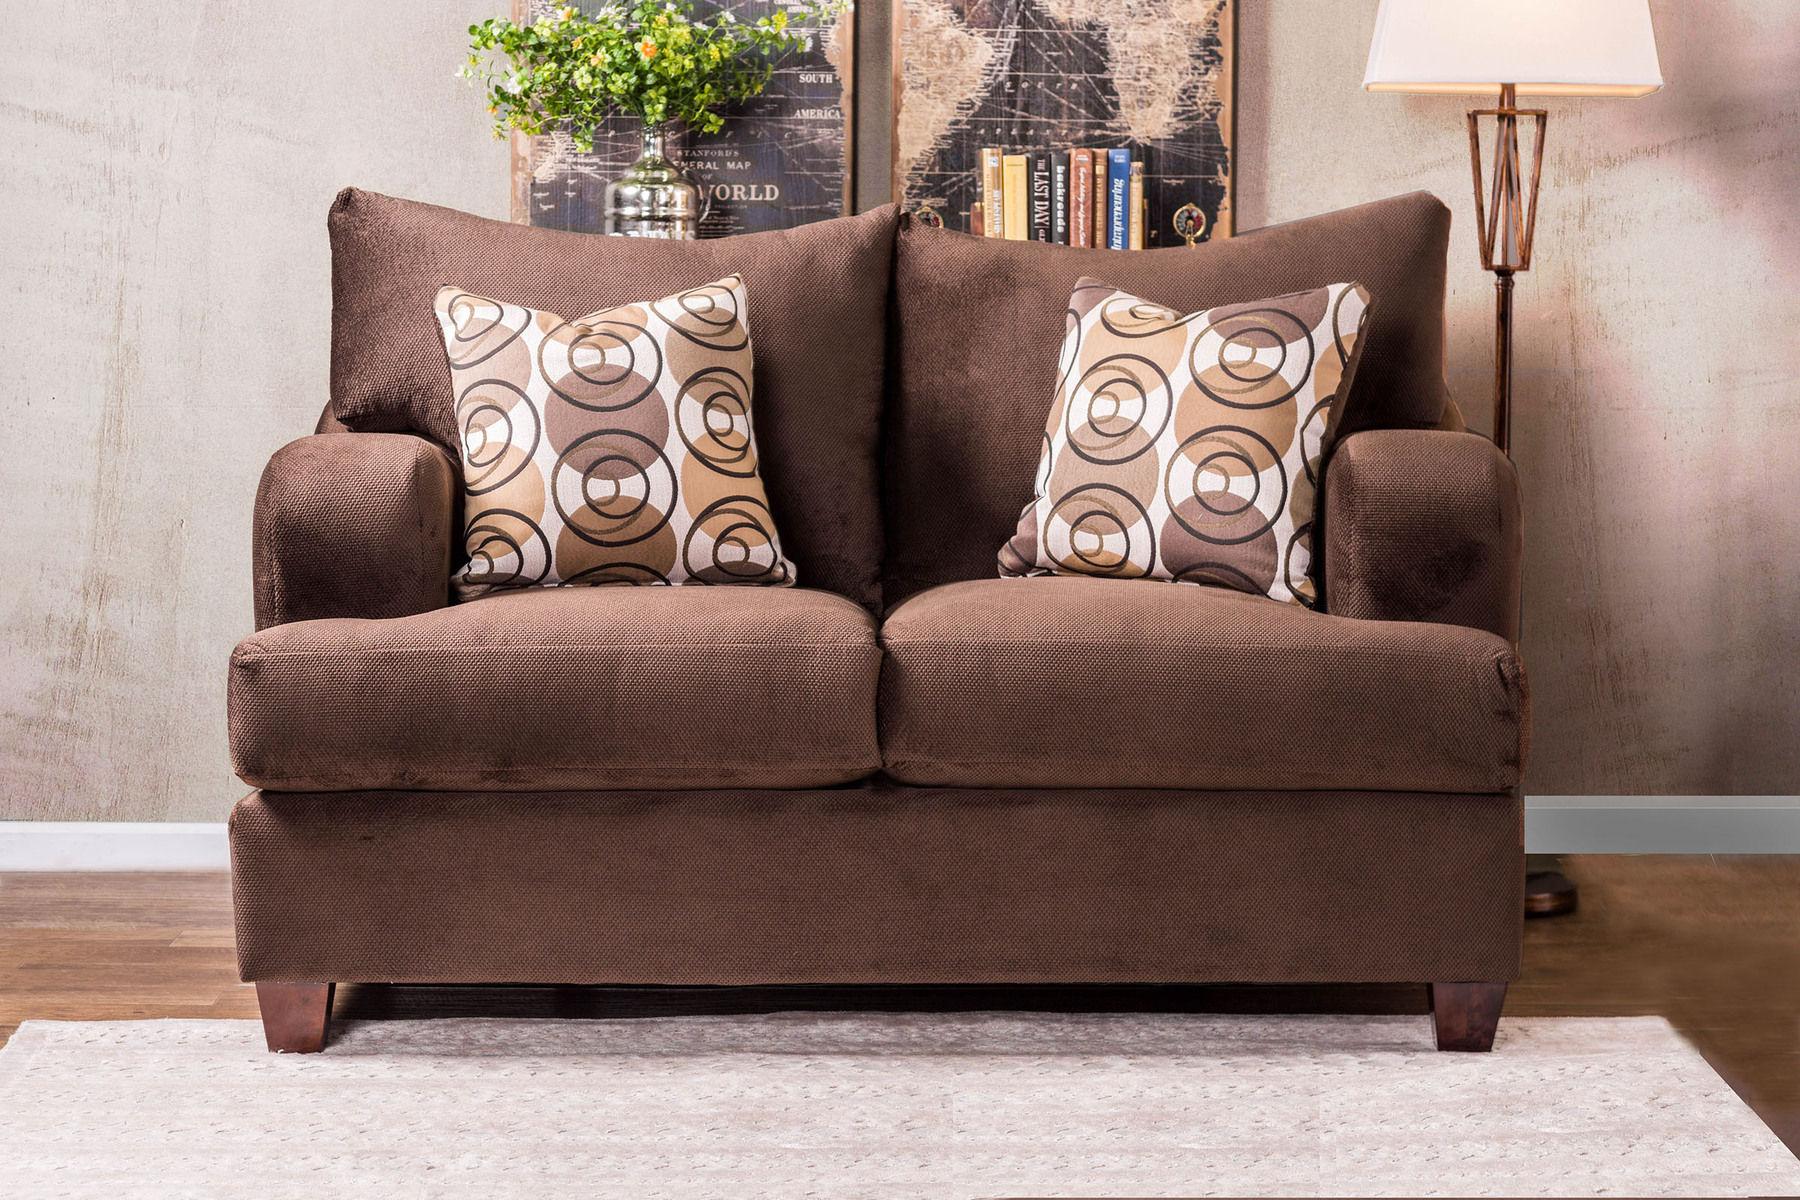 Transitional Loveseat WESSINGTON SM6131-LV SM6131-LV in Chocolate Chenille